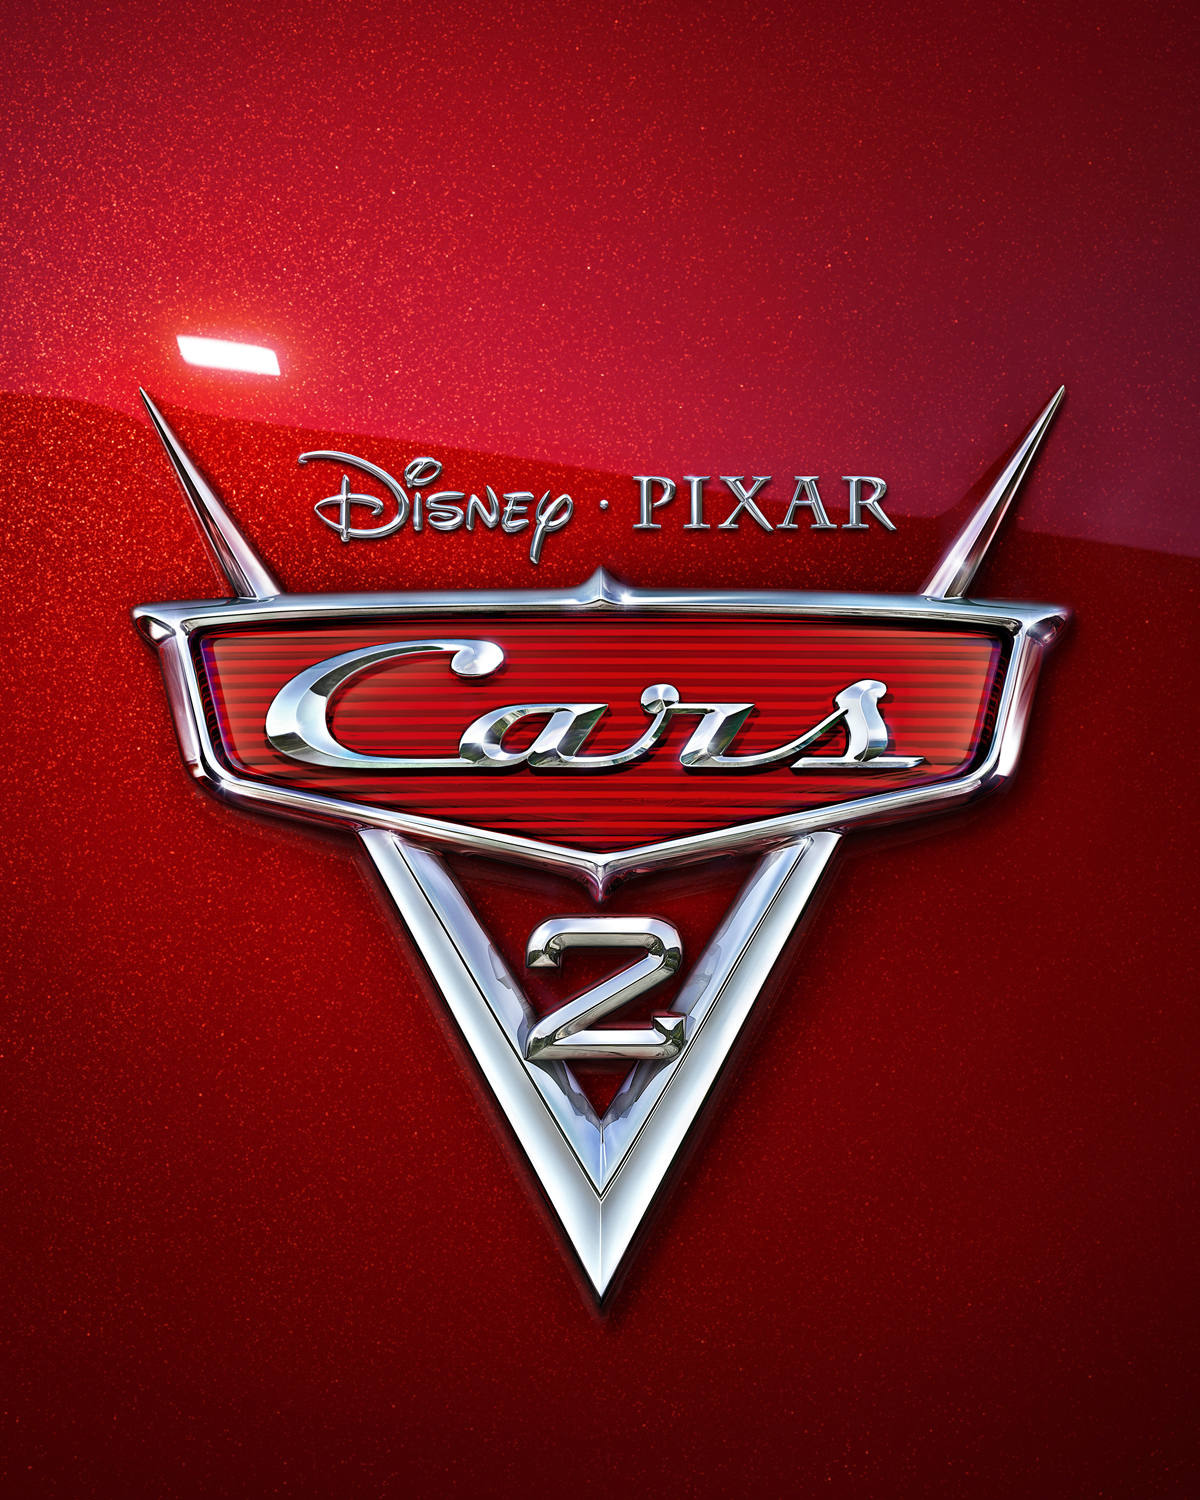 CARS 2 Images